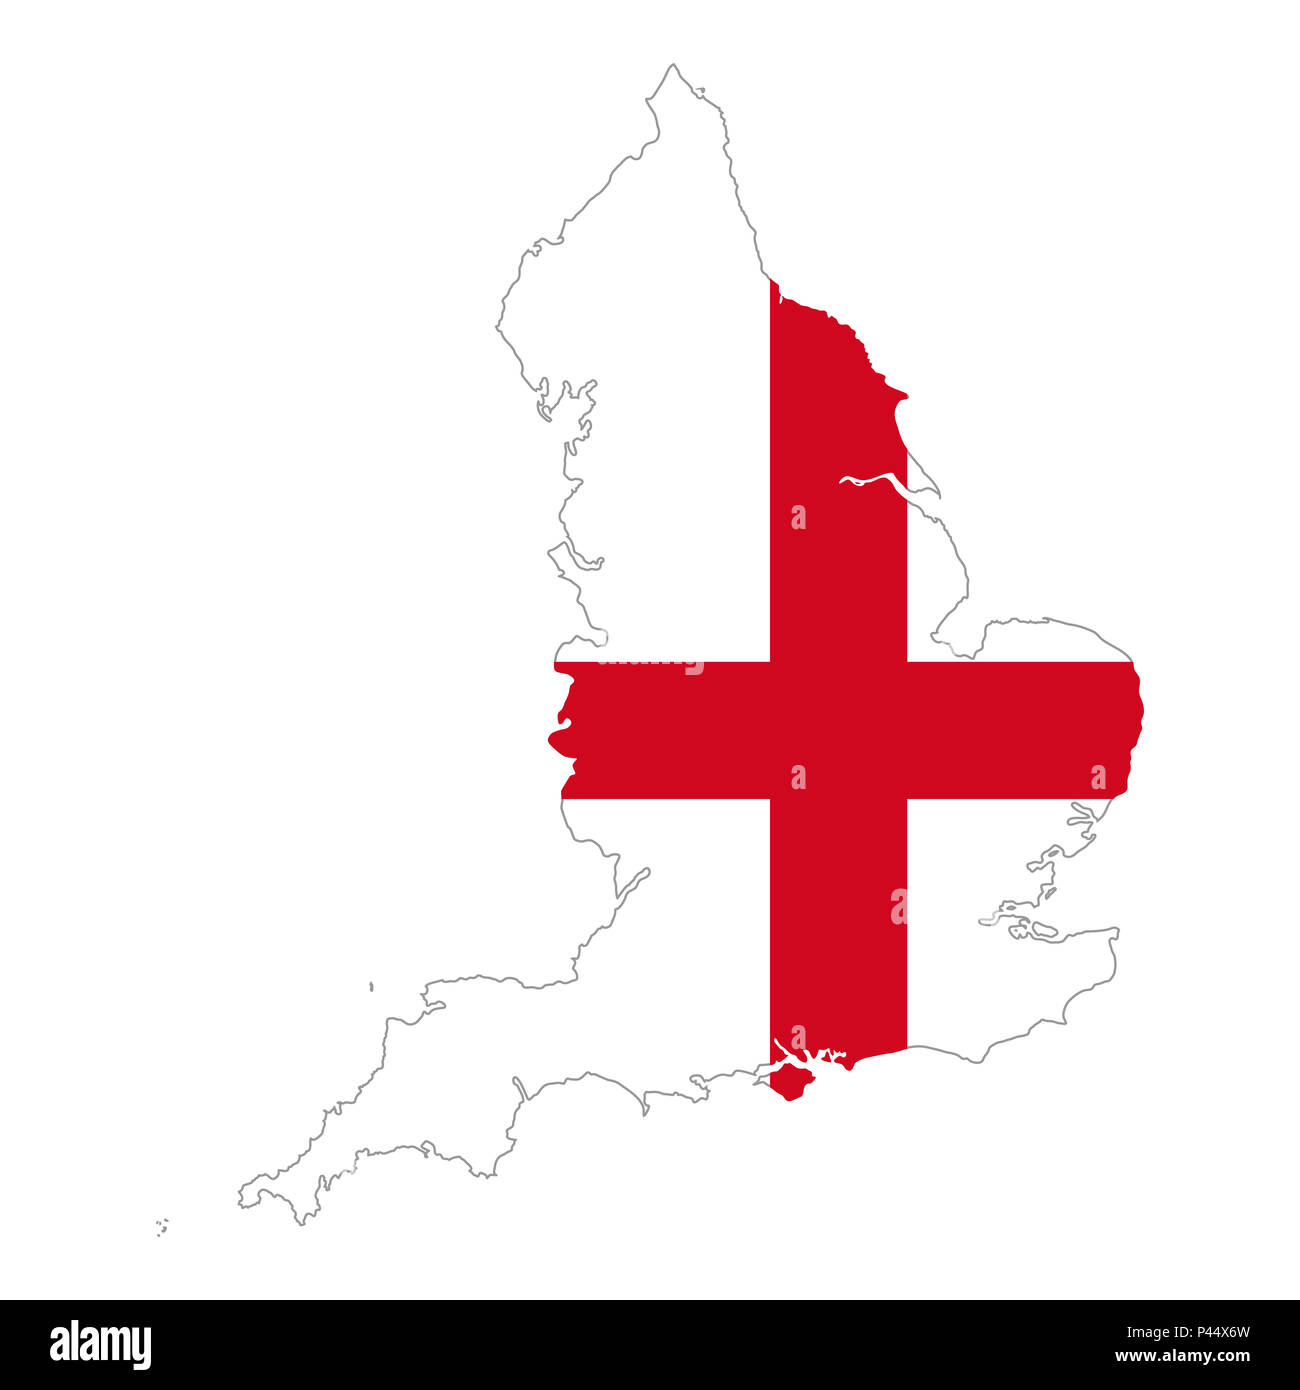 Flag of England in country silhouette. A red St George's Cross on a white field. Country and part of United Kingdom and island Great Britain, Europe. Stock Photo